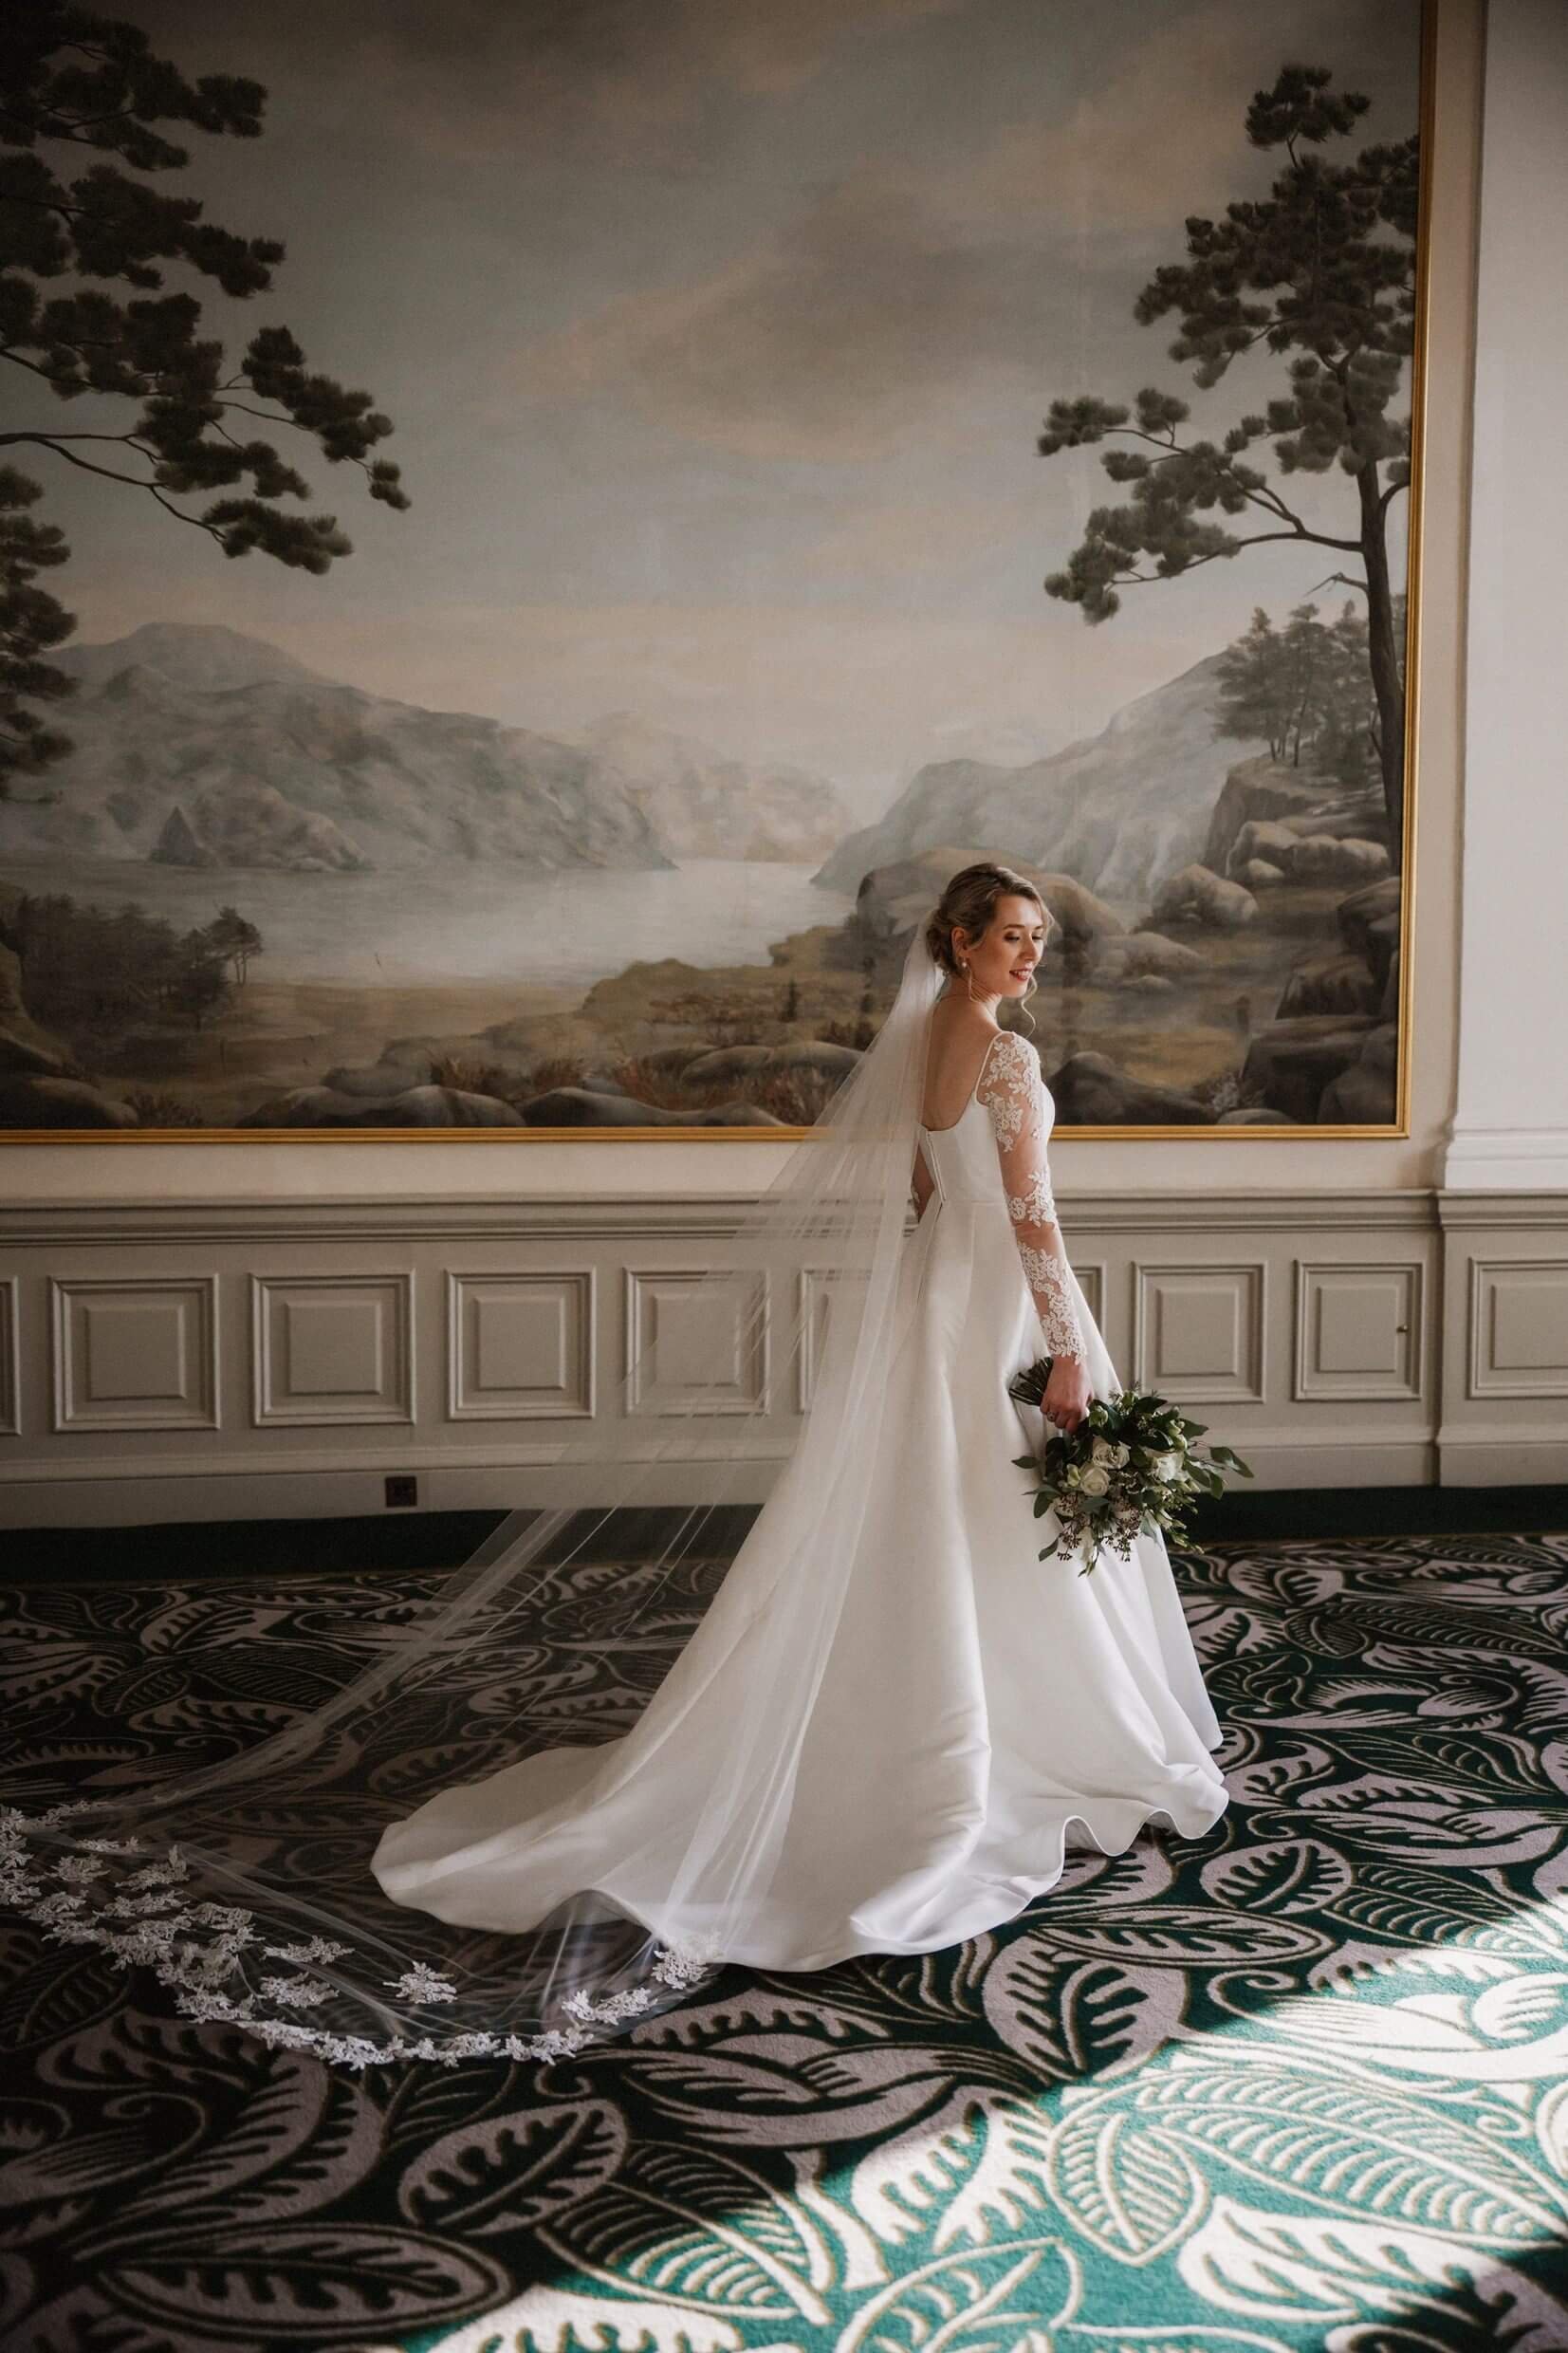 interior inside view of the balmoral hotel edinburgh wedding venue showing the bride standing in front of a large landscape painting